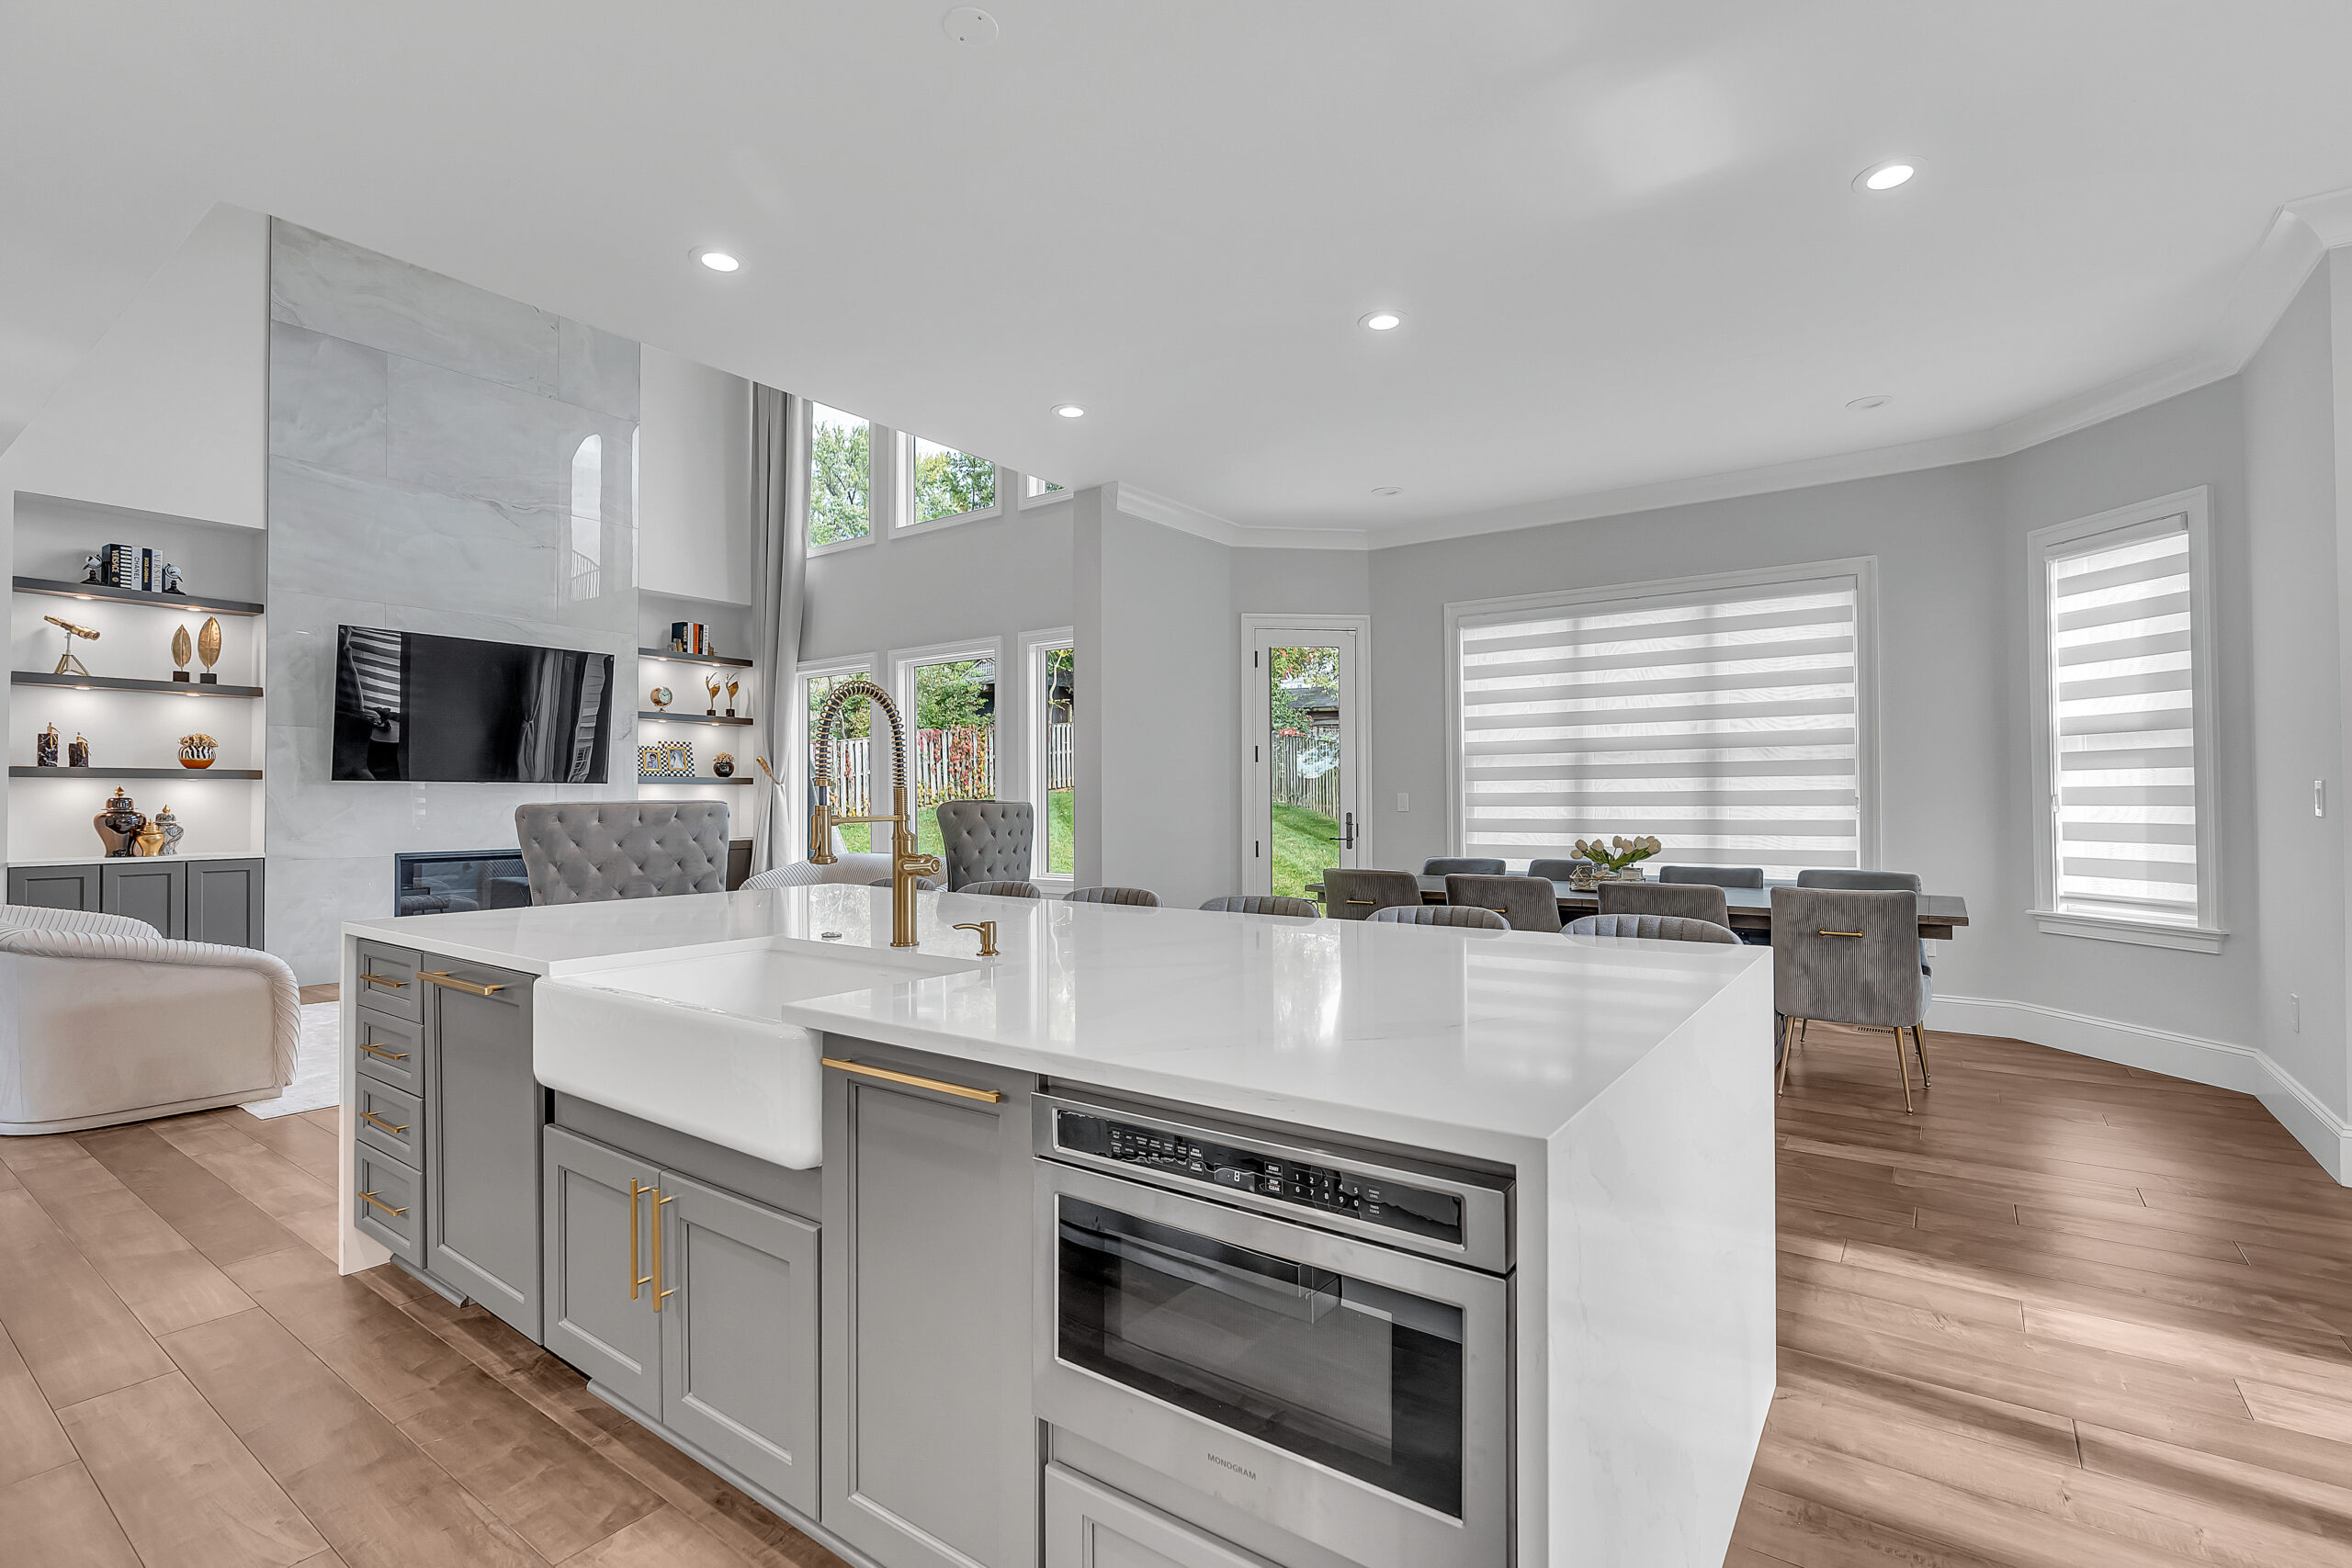 Elegant kitchen with white countertop, and gray cabinets